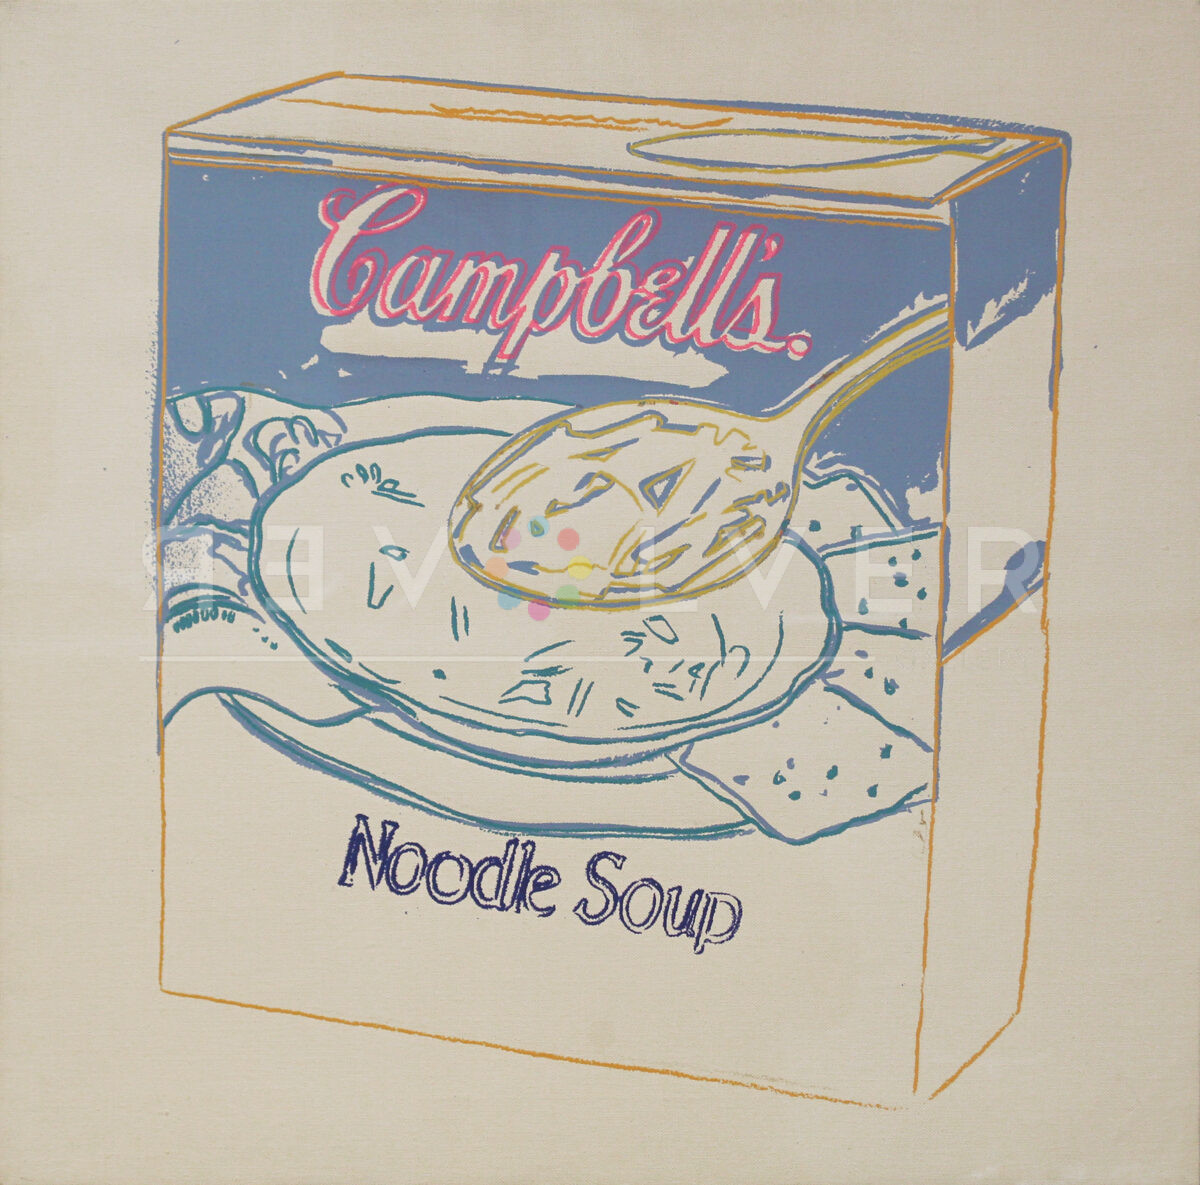 Stock image for Campbell's Noodle Soup Box.